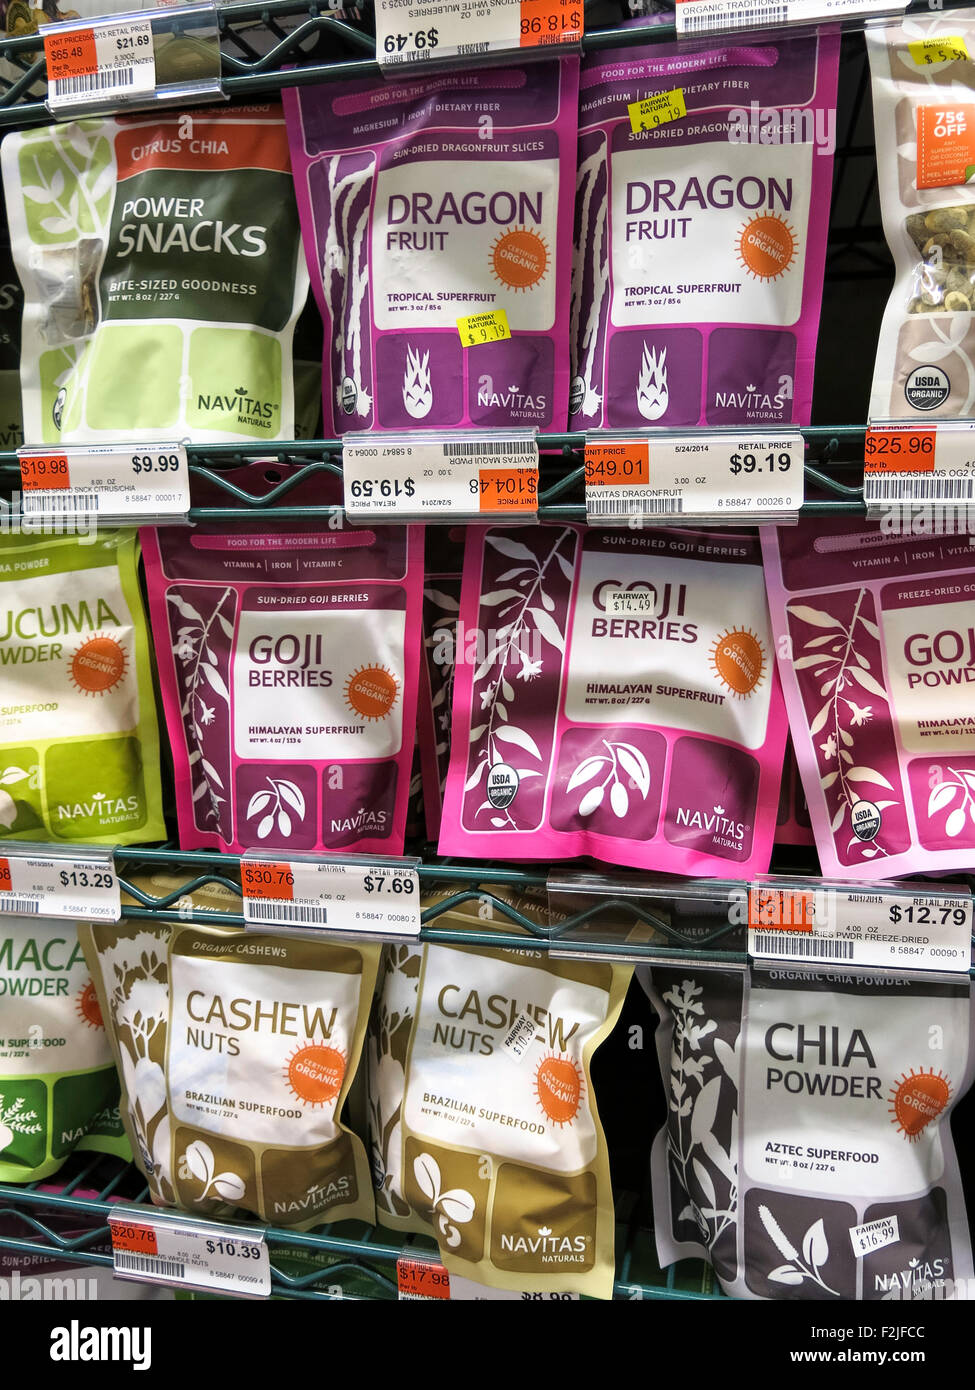 Natural and Healthy Fruit and Nut Snack Bags, Fairway Super Market, New York City, USA Stock Photo